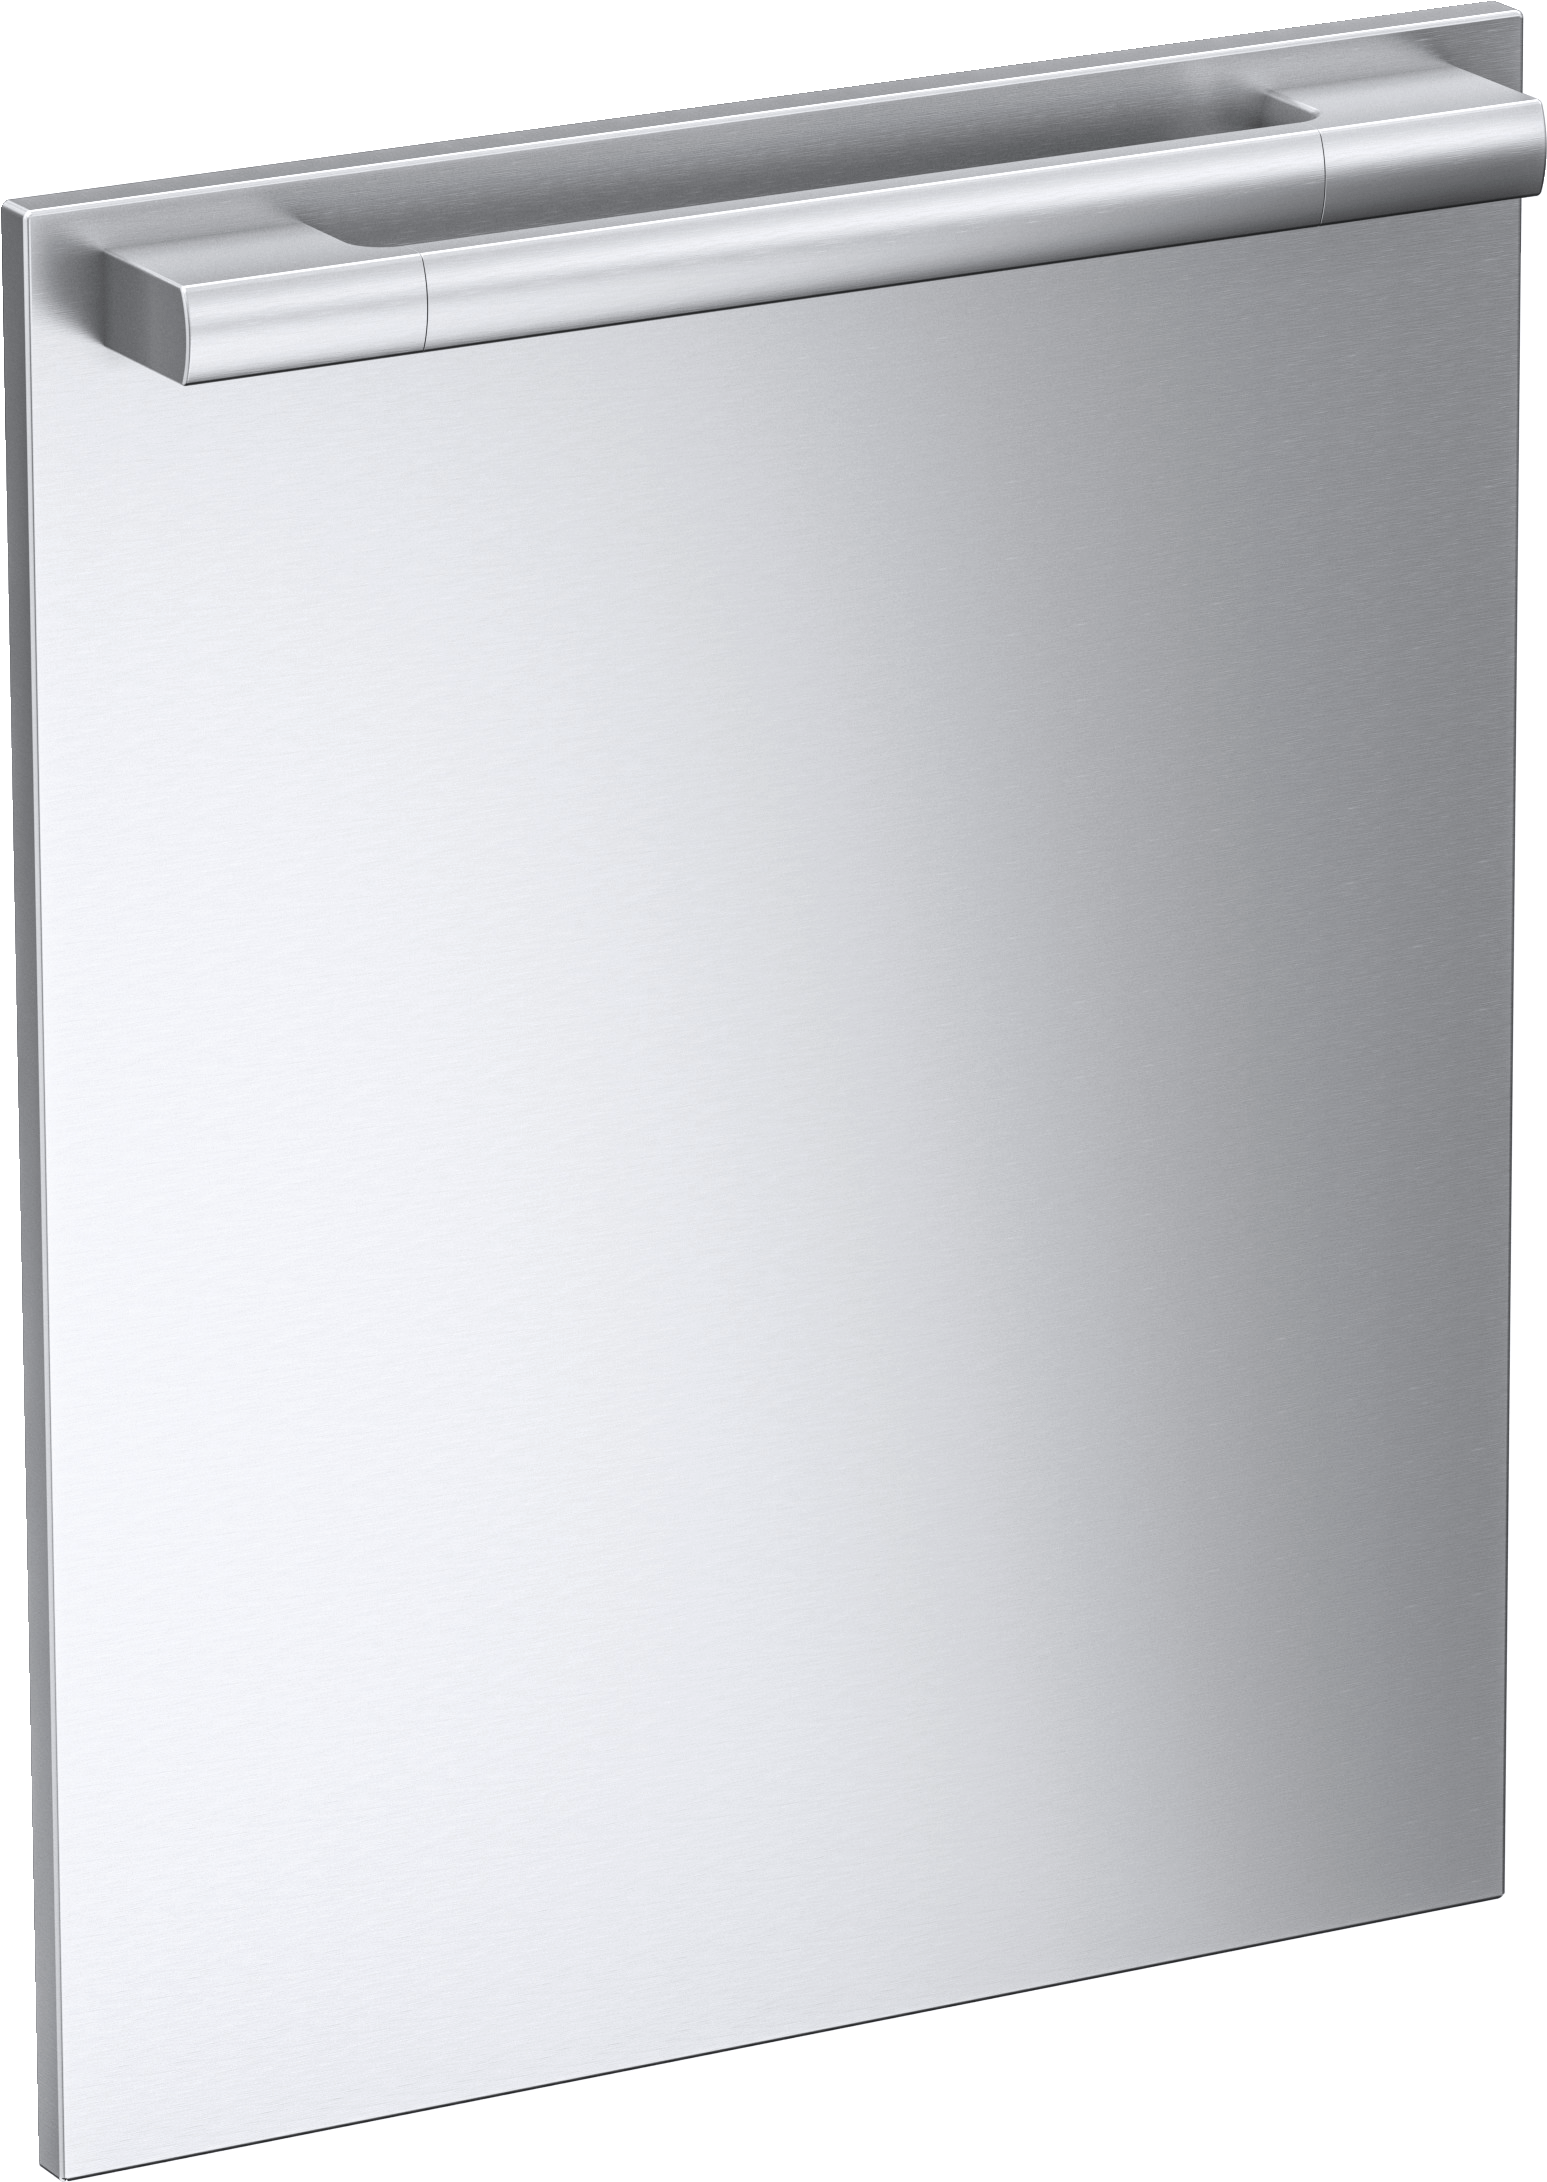 Miele GFVI71172 Gfvi 711/72 - Int. Front Panel: W X H, 24 X 28 In In Clean Touch Steel™ Finish With Handle For Fully Integrated Dishwashers.